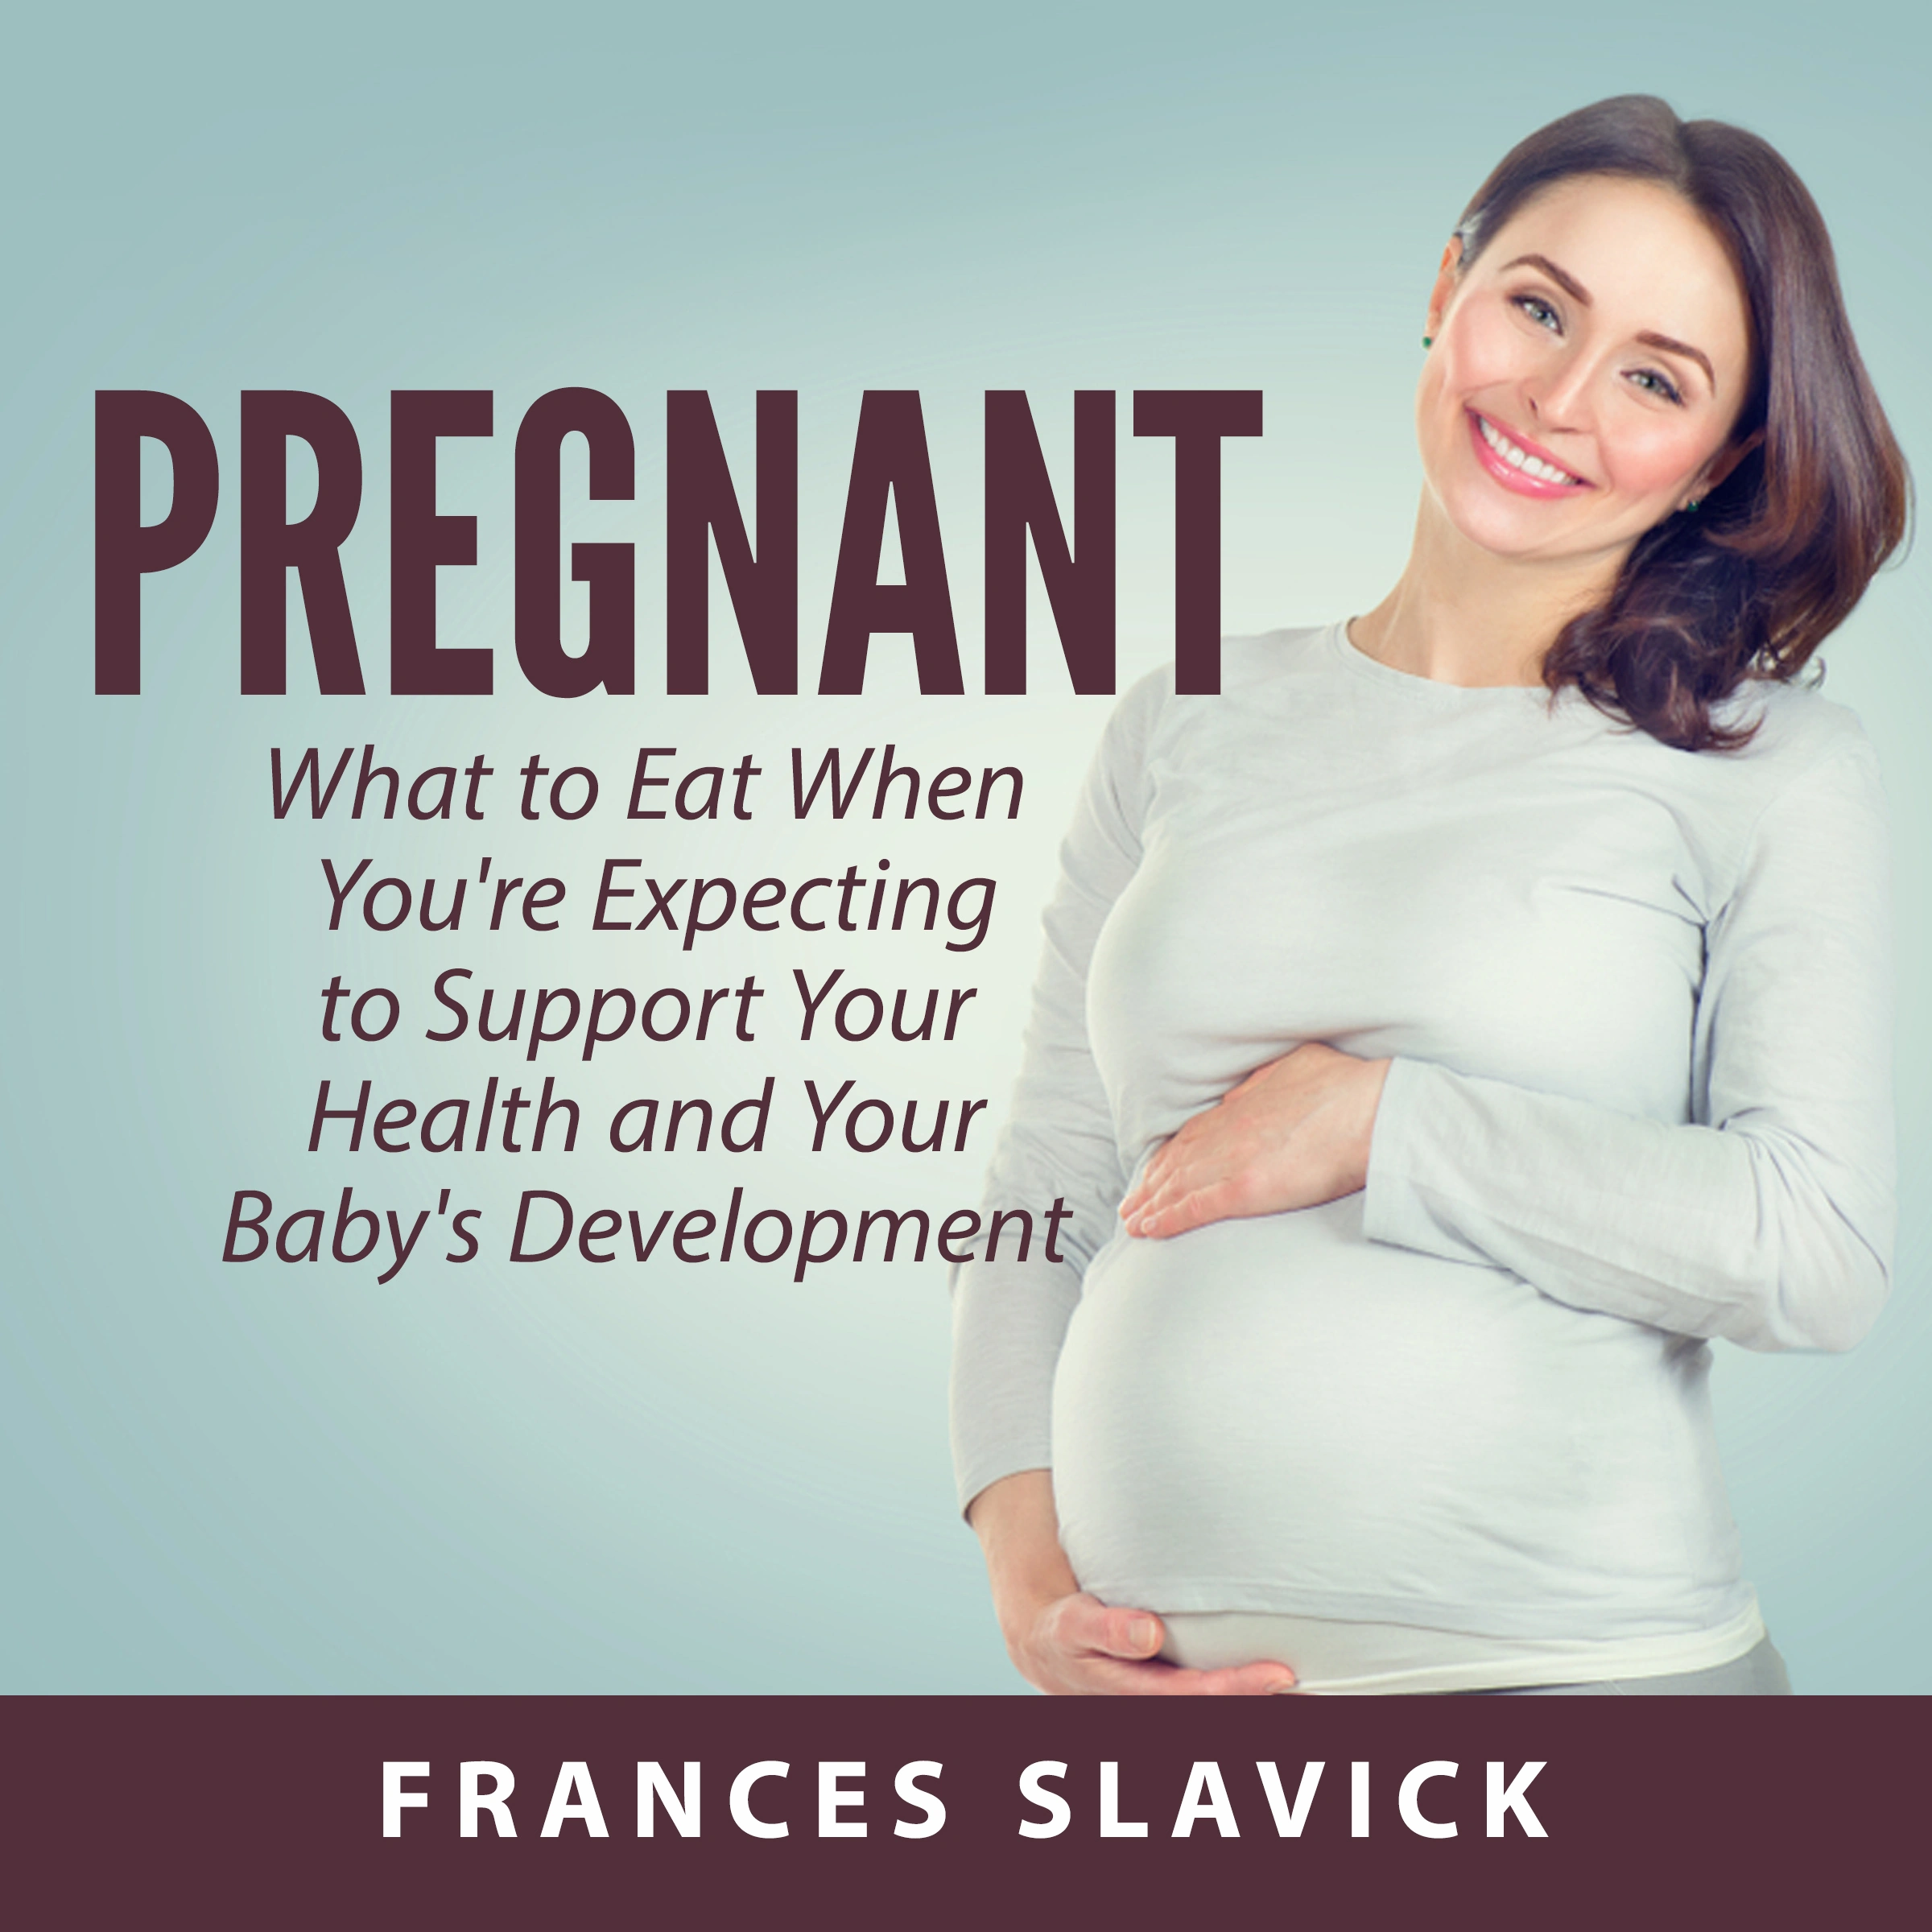 Pregnant: What to Eat When You're Expecting to Support Your Health and Your Baby's Development Audiobook by Frances Slavick